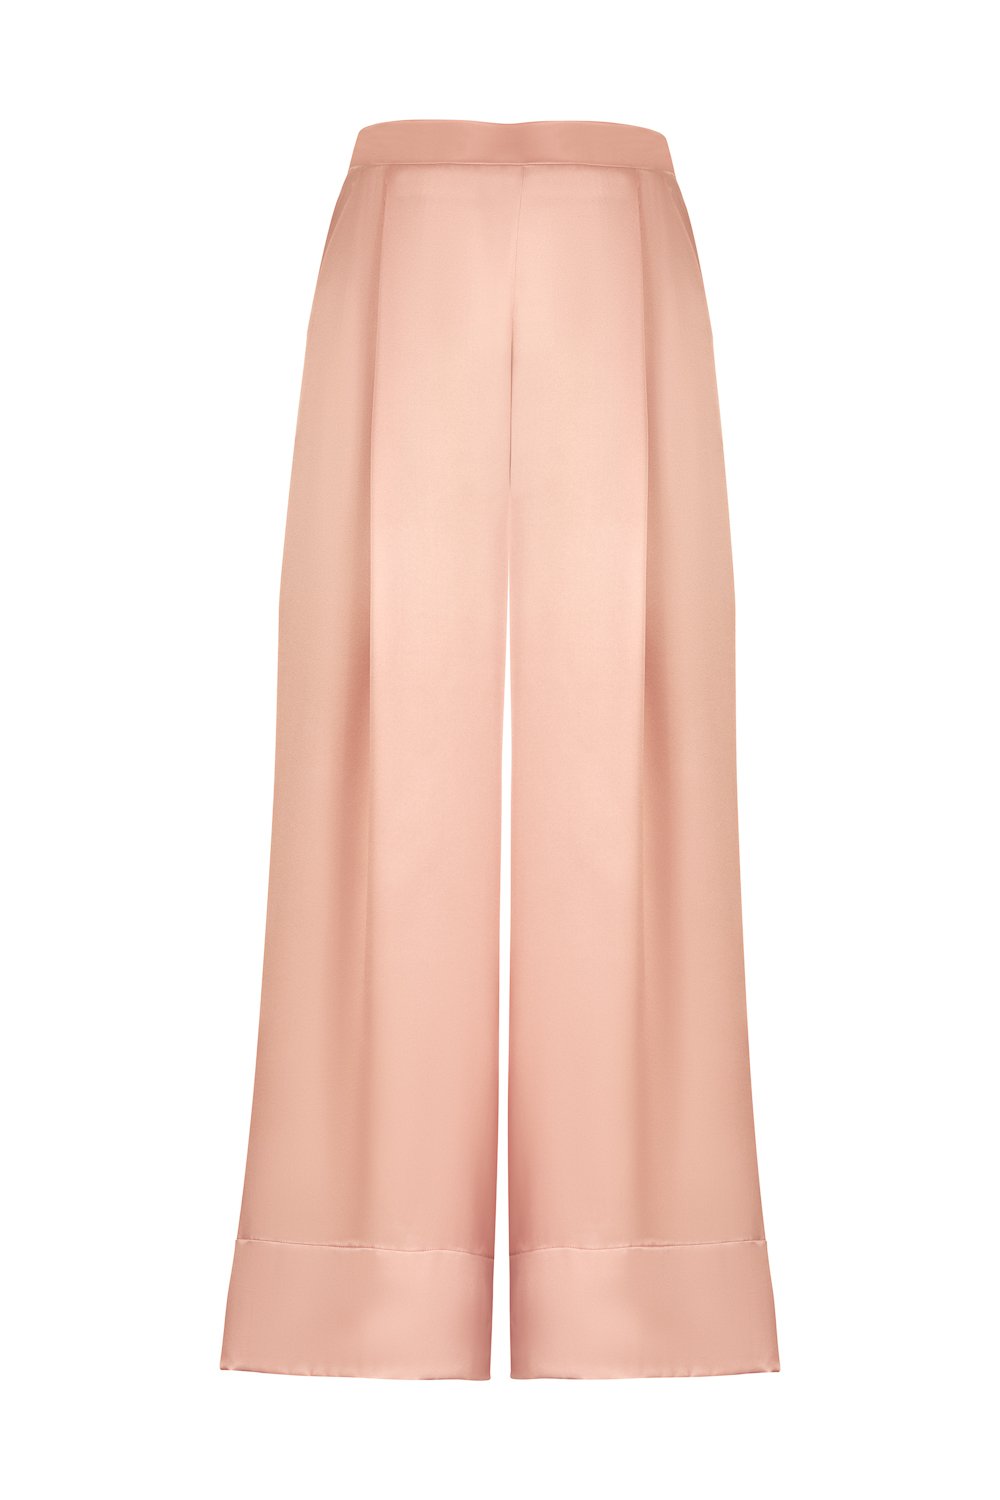 Palazzo Style Silk Pants in Shell Pink